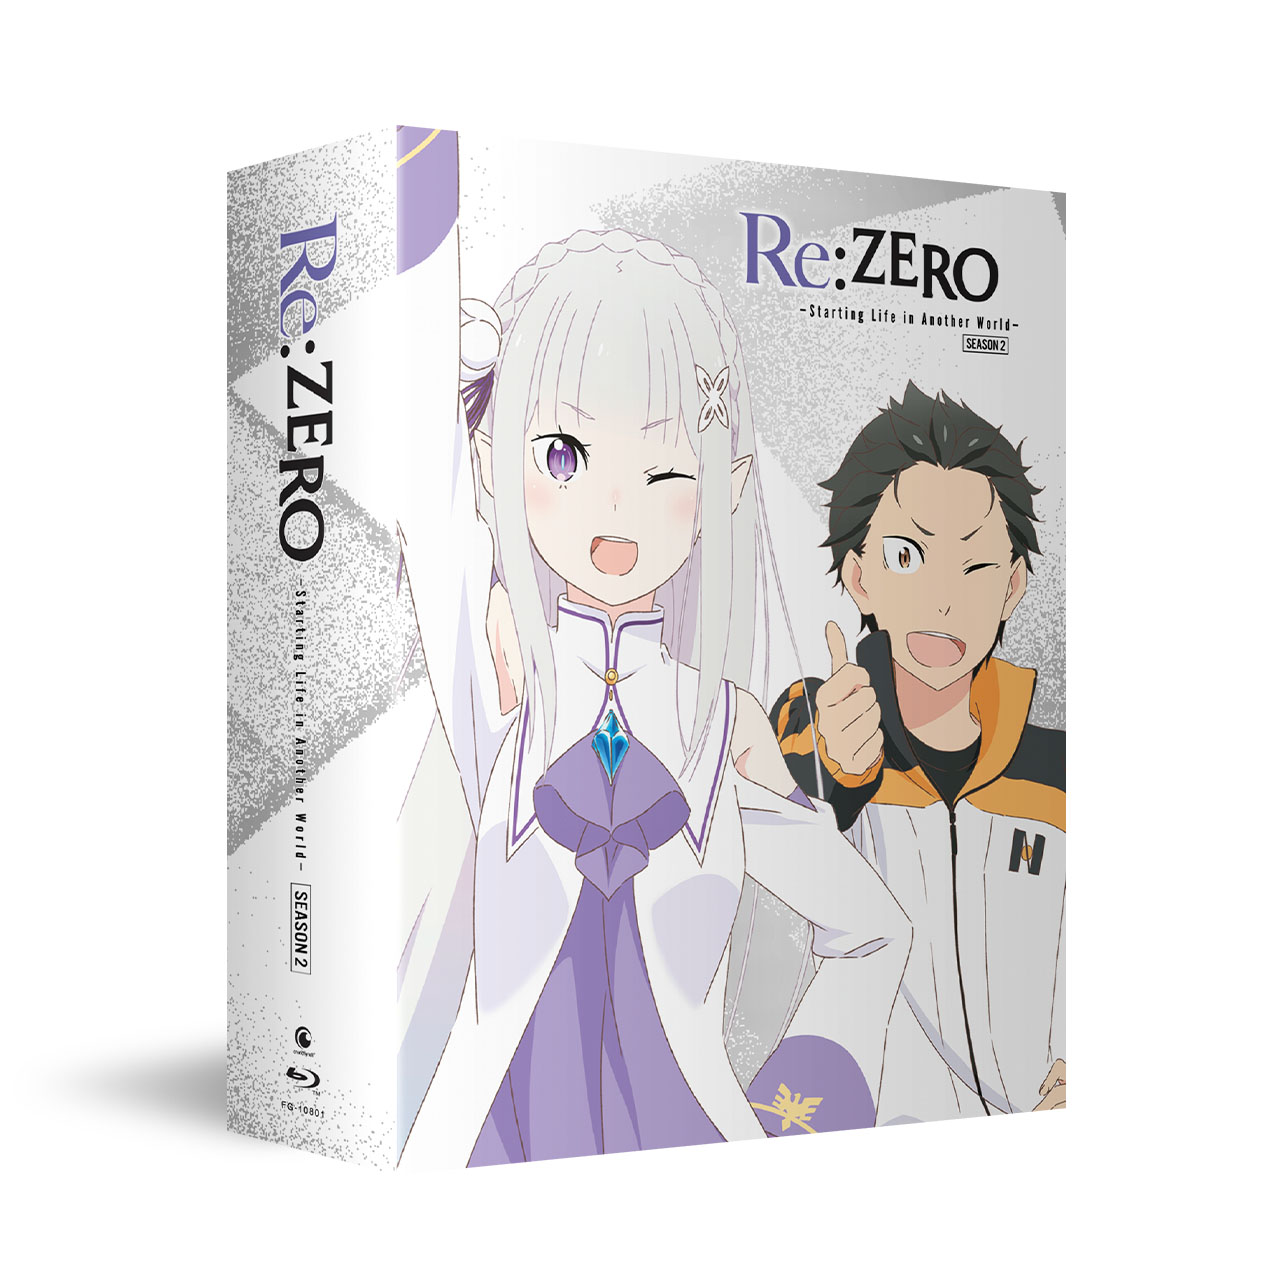 Re:ZERO -Starting Life in Another World- Season 2 - Blu-ray - Limited Edition image count 6